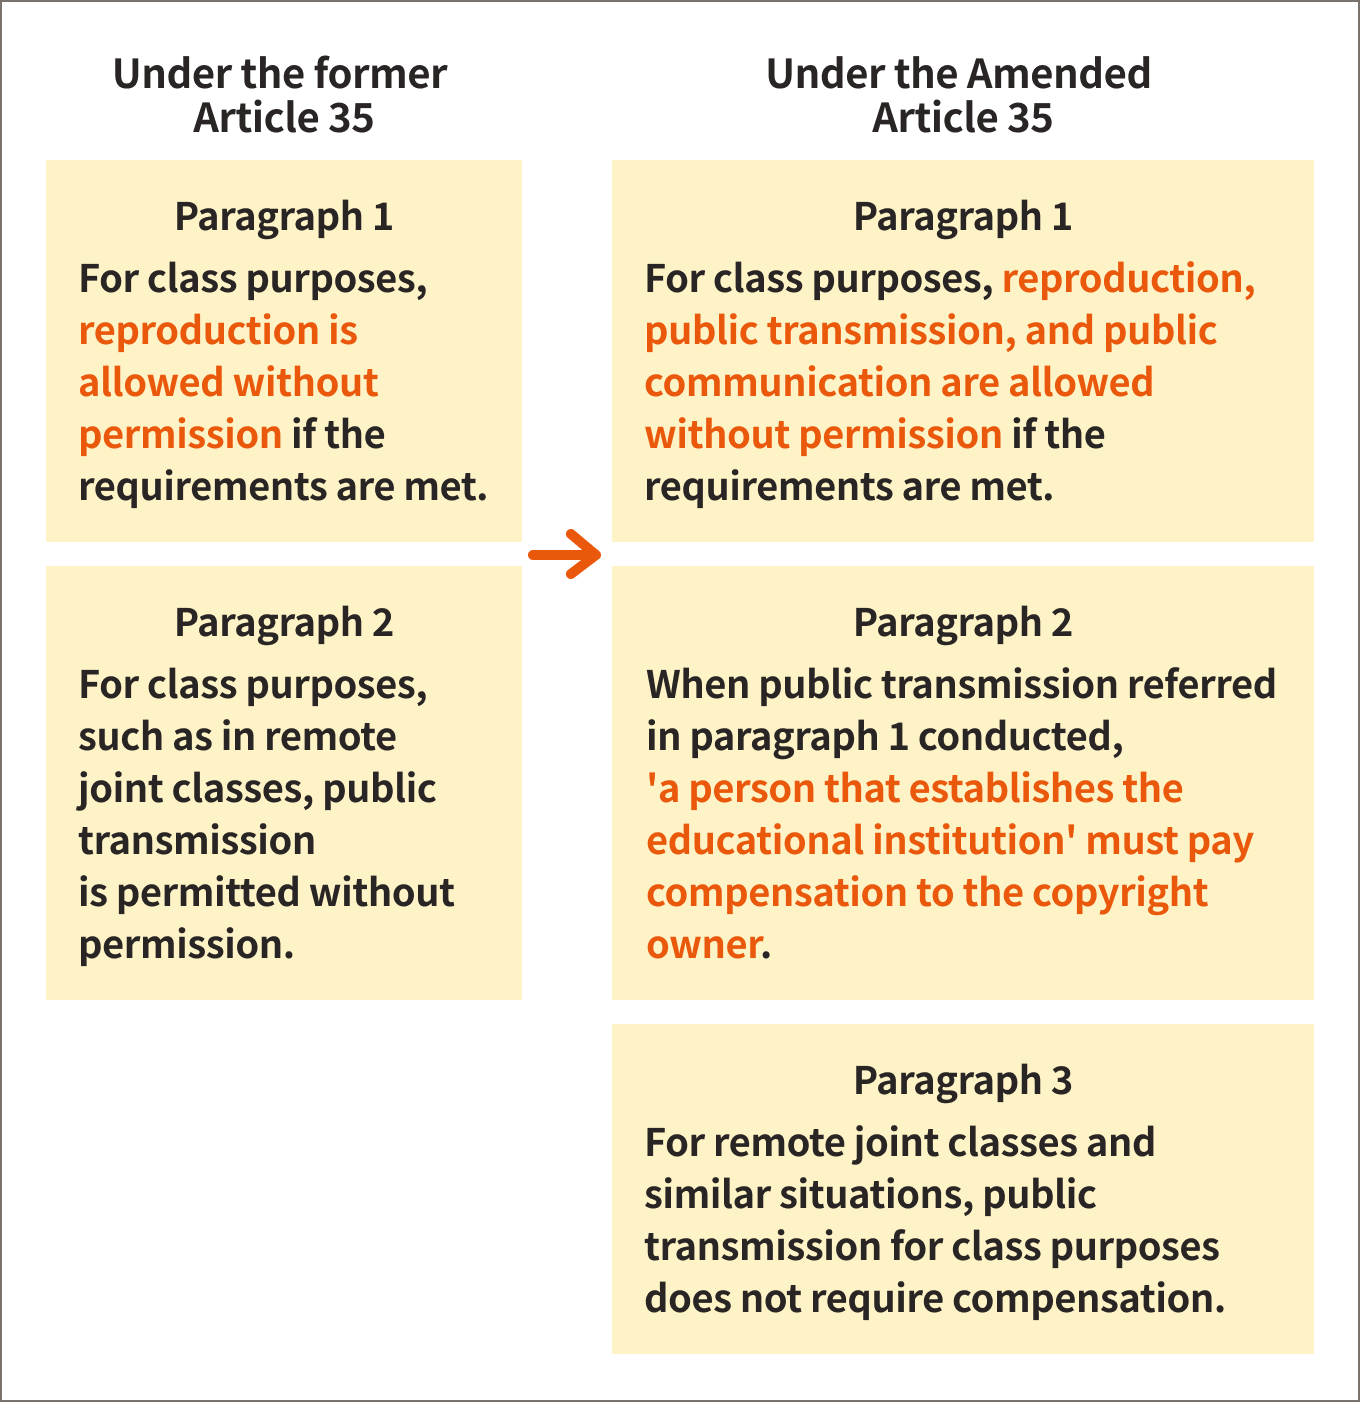 Under the former Article 35, Paragraph 1, reproduction for class purposes is allowed without permission if the requirements are met. Under the former Article 35, Paragraph 2, public transmission for class purposes, such as in remote joint classes, is permitted without permission. Under the Amended Article 35, Paragraph 1, if the requirements are met, reproduction, public transmission, and public communication for class purposes are allowed without permission. Under the Amended Article 35, Paragraph 2, when public transmission referred to in Paragraph 1 of the Amended Article 35 is conducted, 'a person that establishes an educational institution' must pay compensation to the copyright owner. Under the Amended Article 35, Paragraph 3, for remote joint classes and similar situations, public transmission for class purposes does not require compensation.